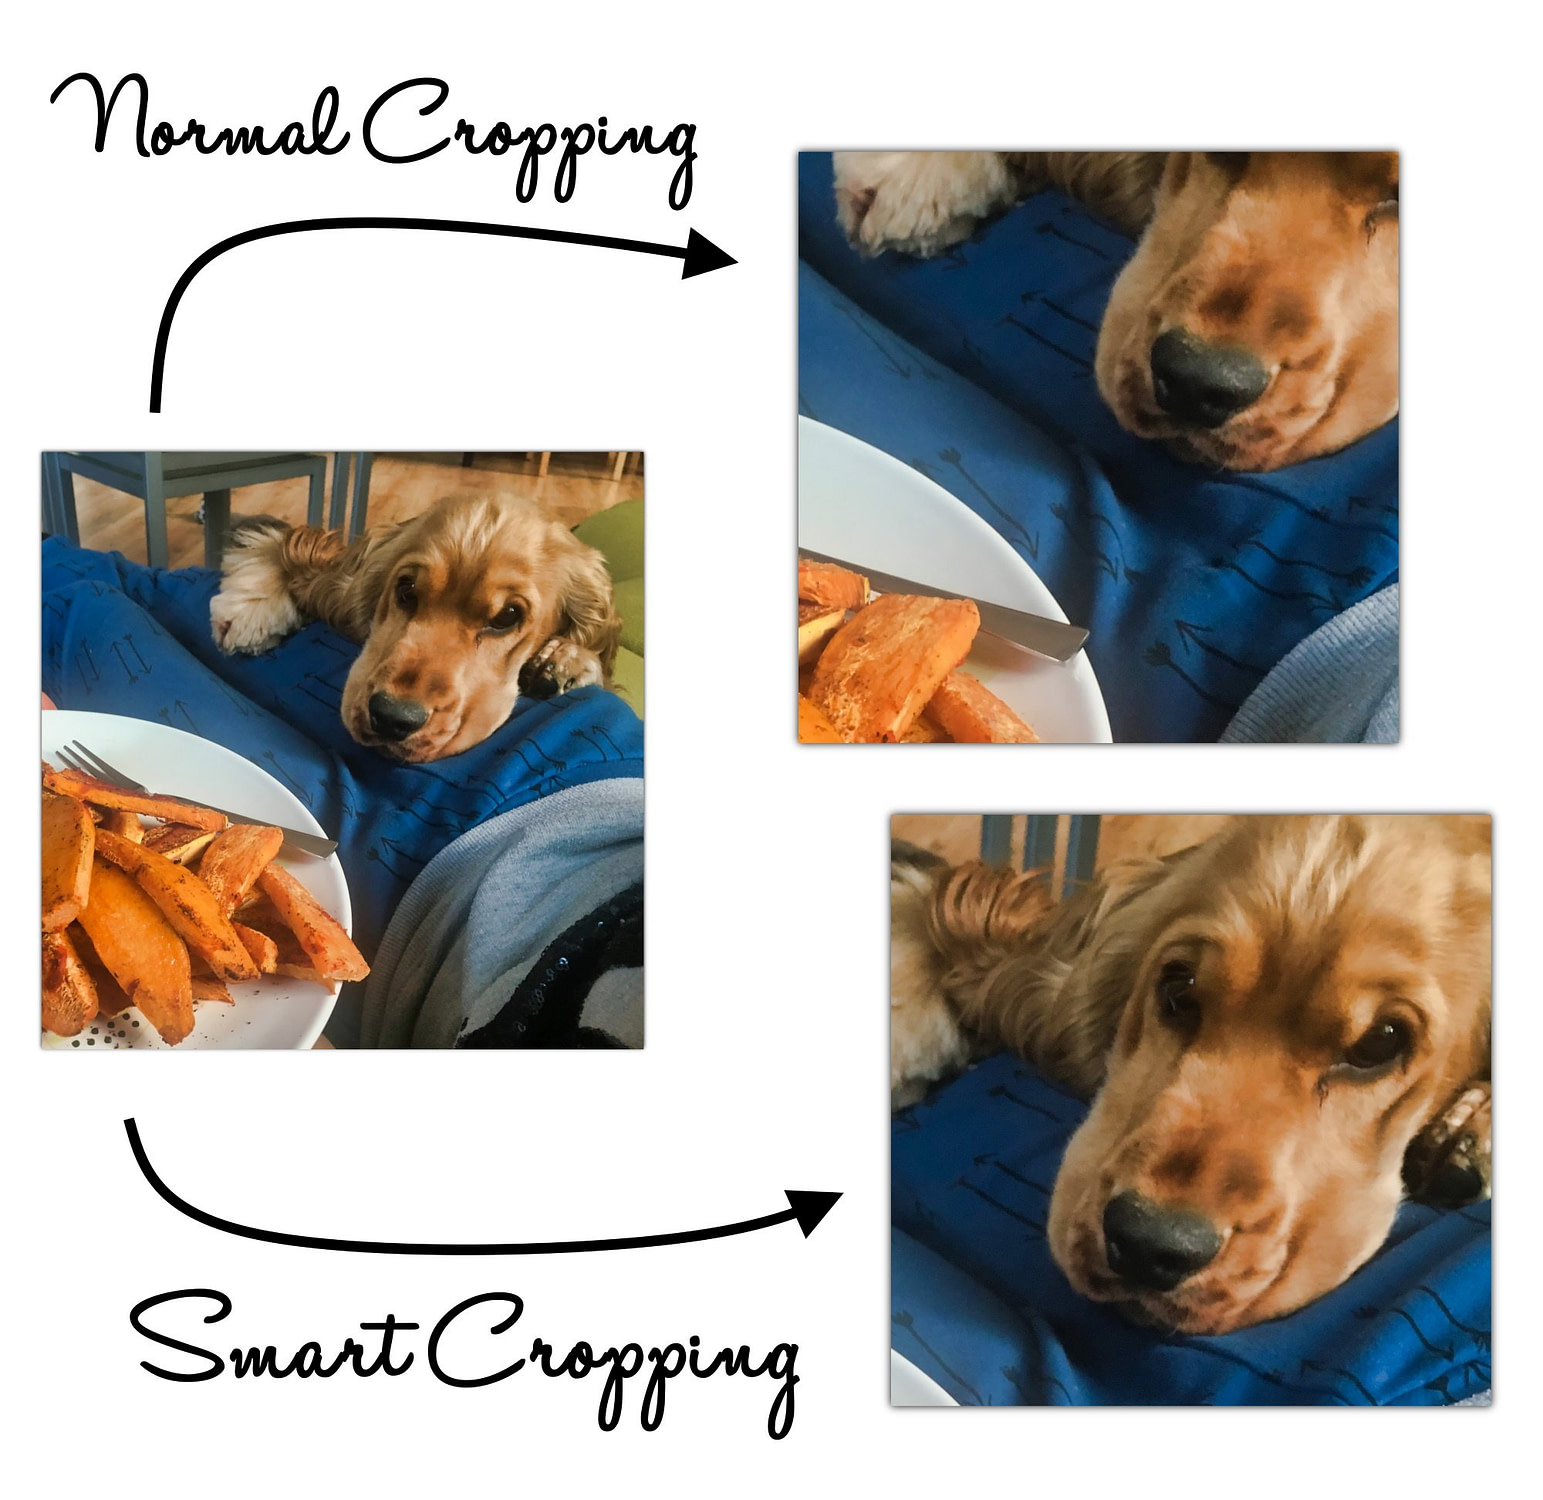 Use smart cropping to create Adaptive images for WordPress.